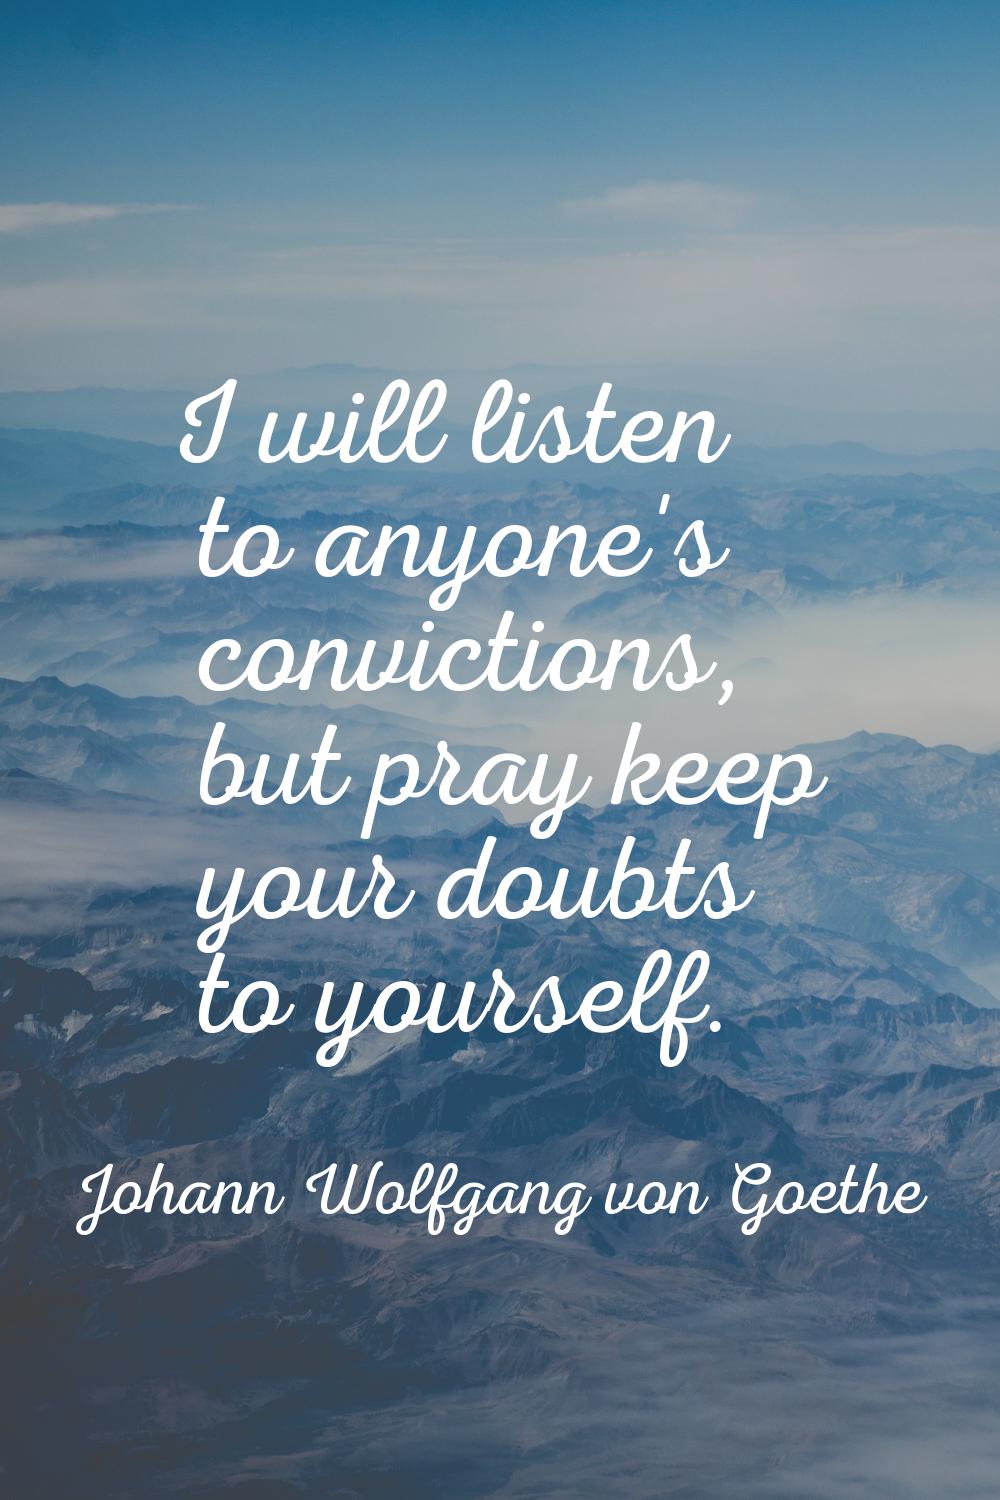 I will listen to anyone's convictions, but pray keep your doubts to yourself.